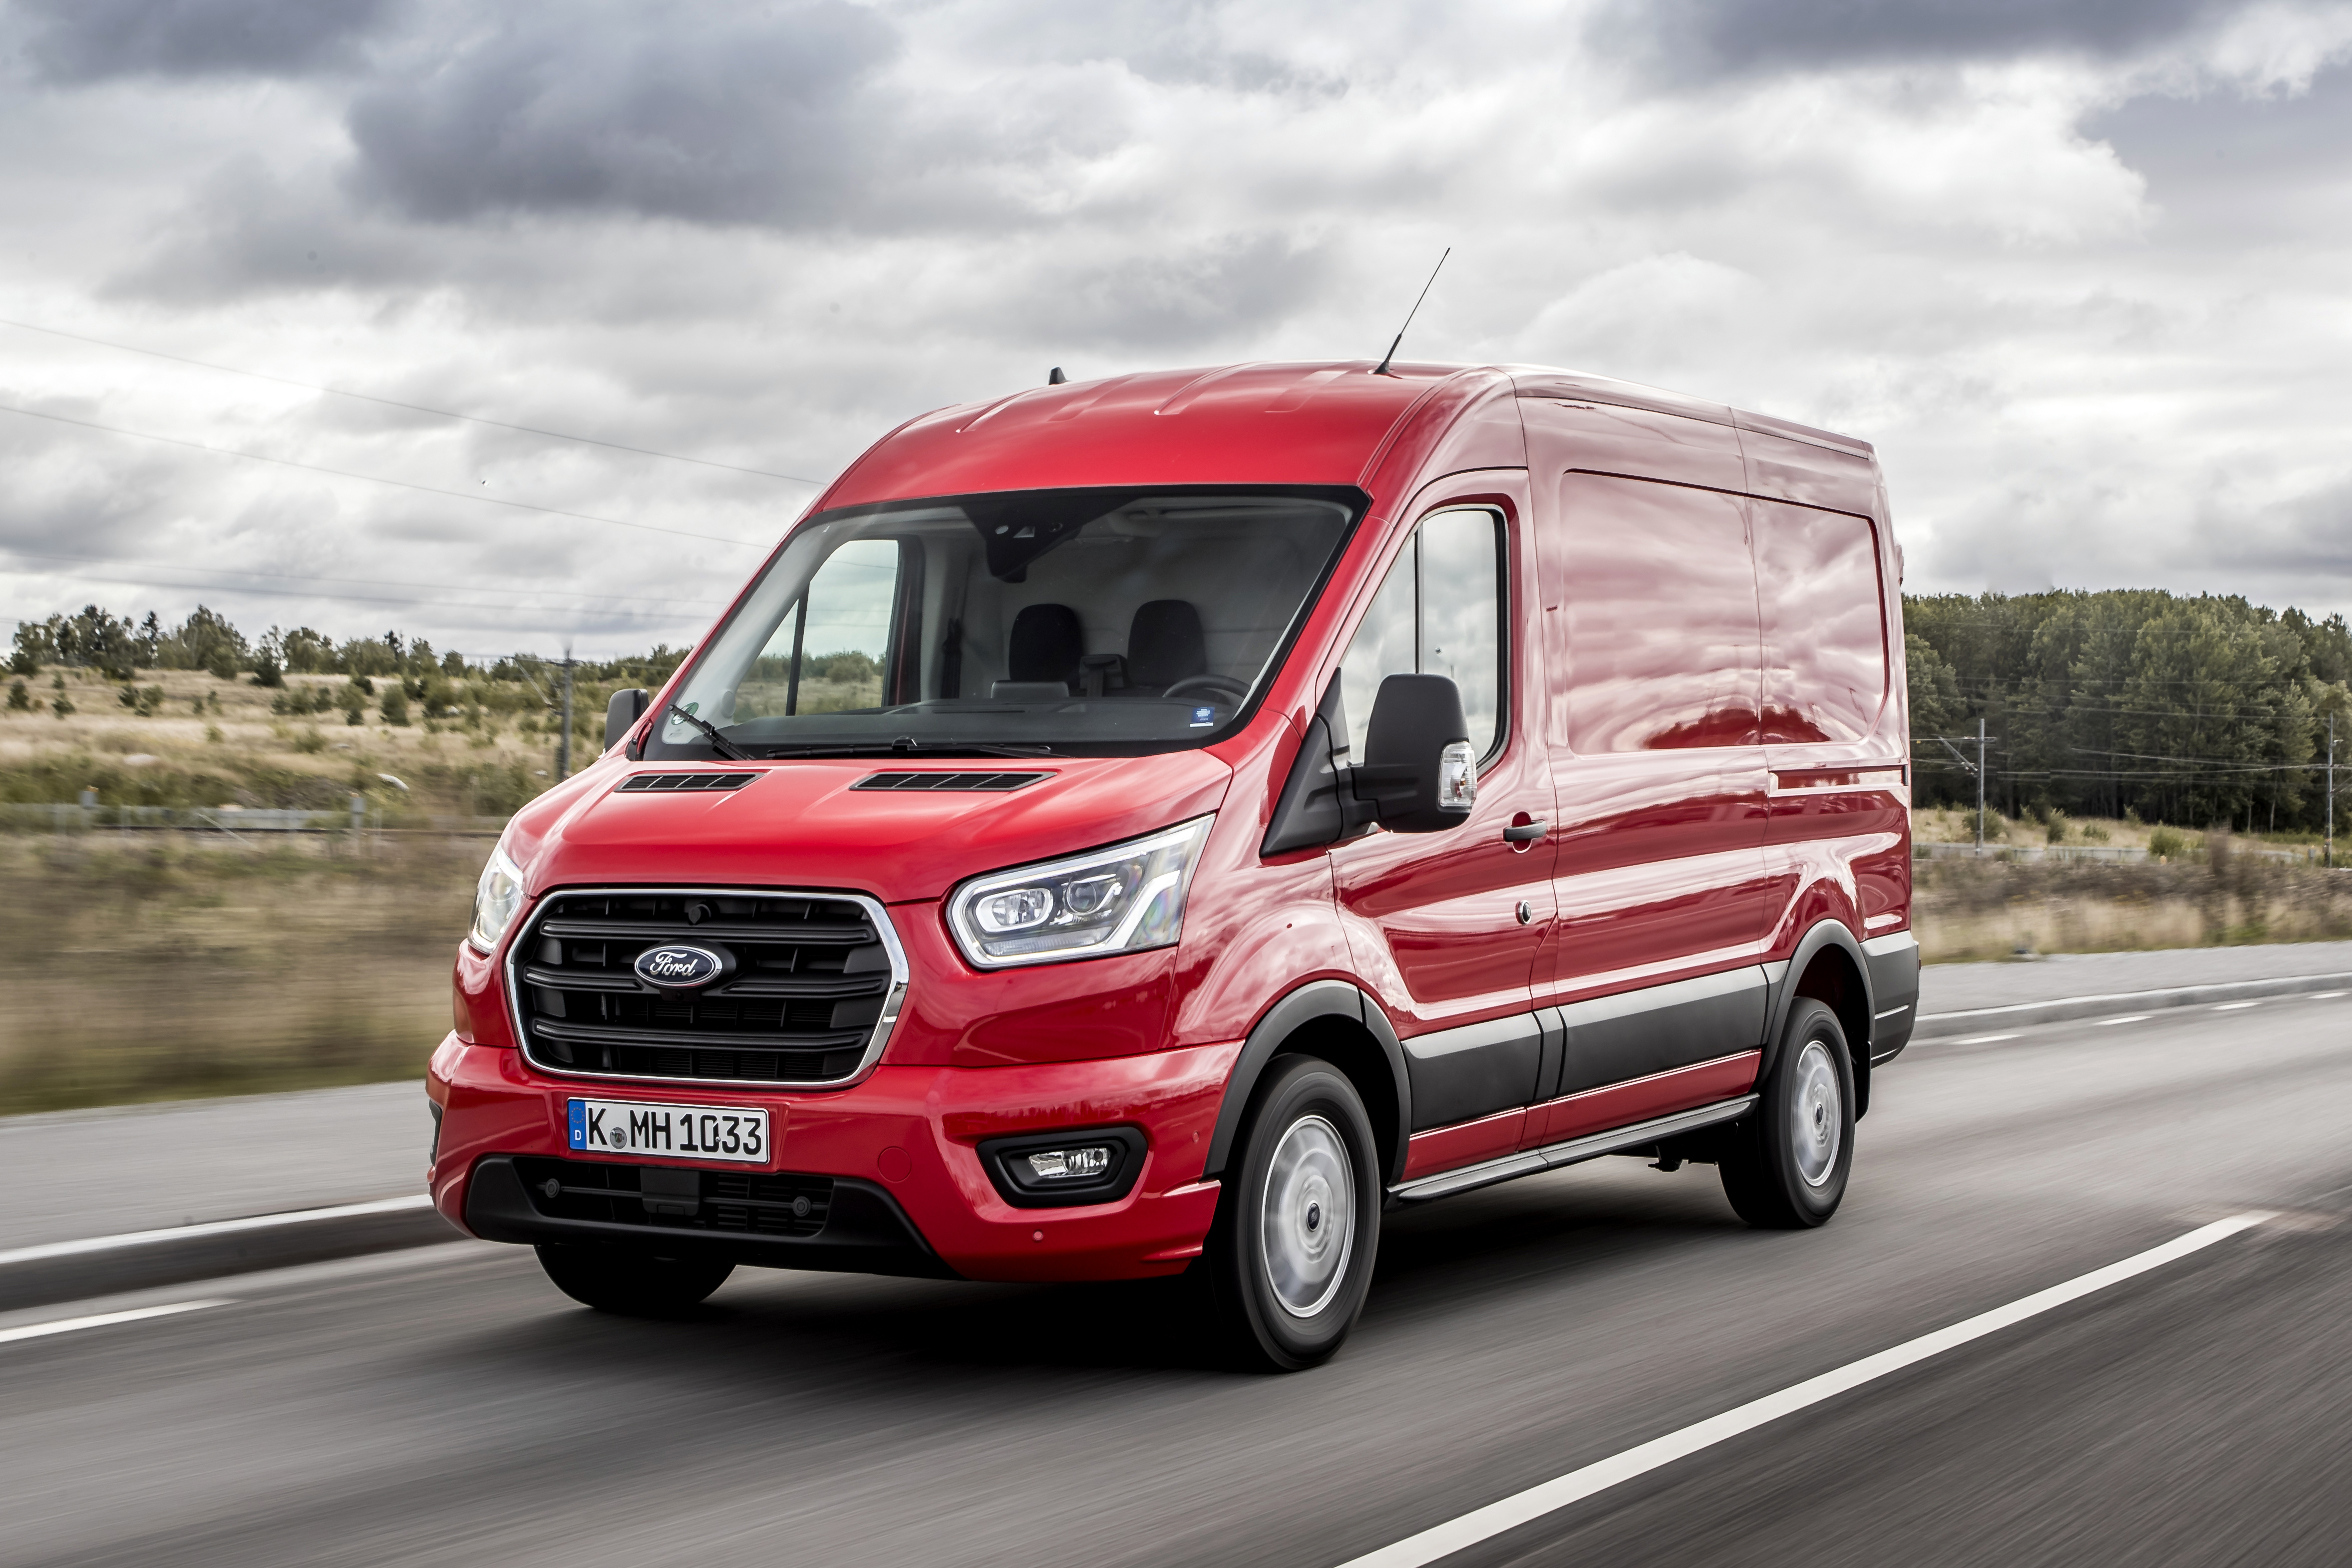 Форд транзит 20. Ford Transit 2021. Ford Transit van. Ford Transit 2019 l1h2. Ford Transit фургон 2020.